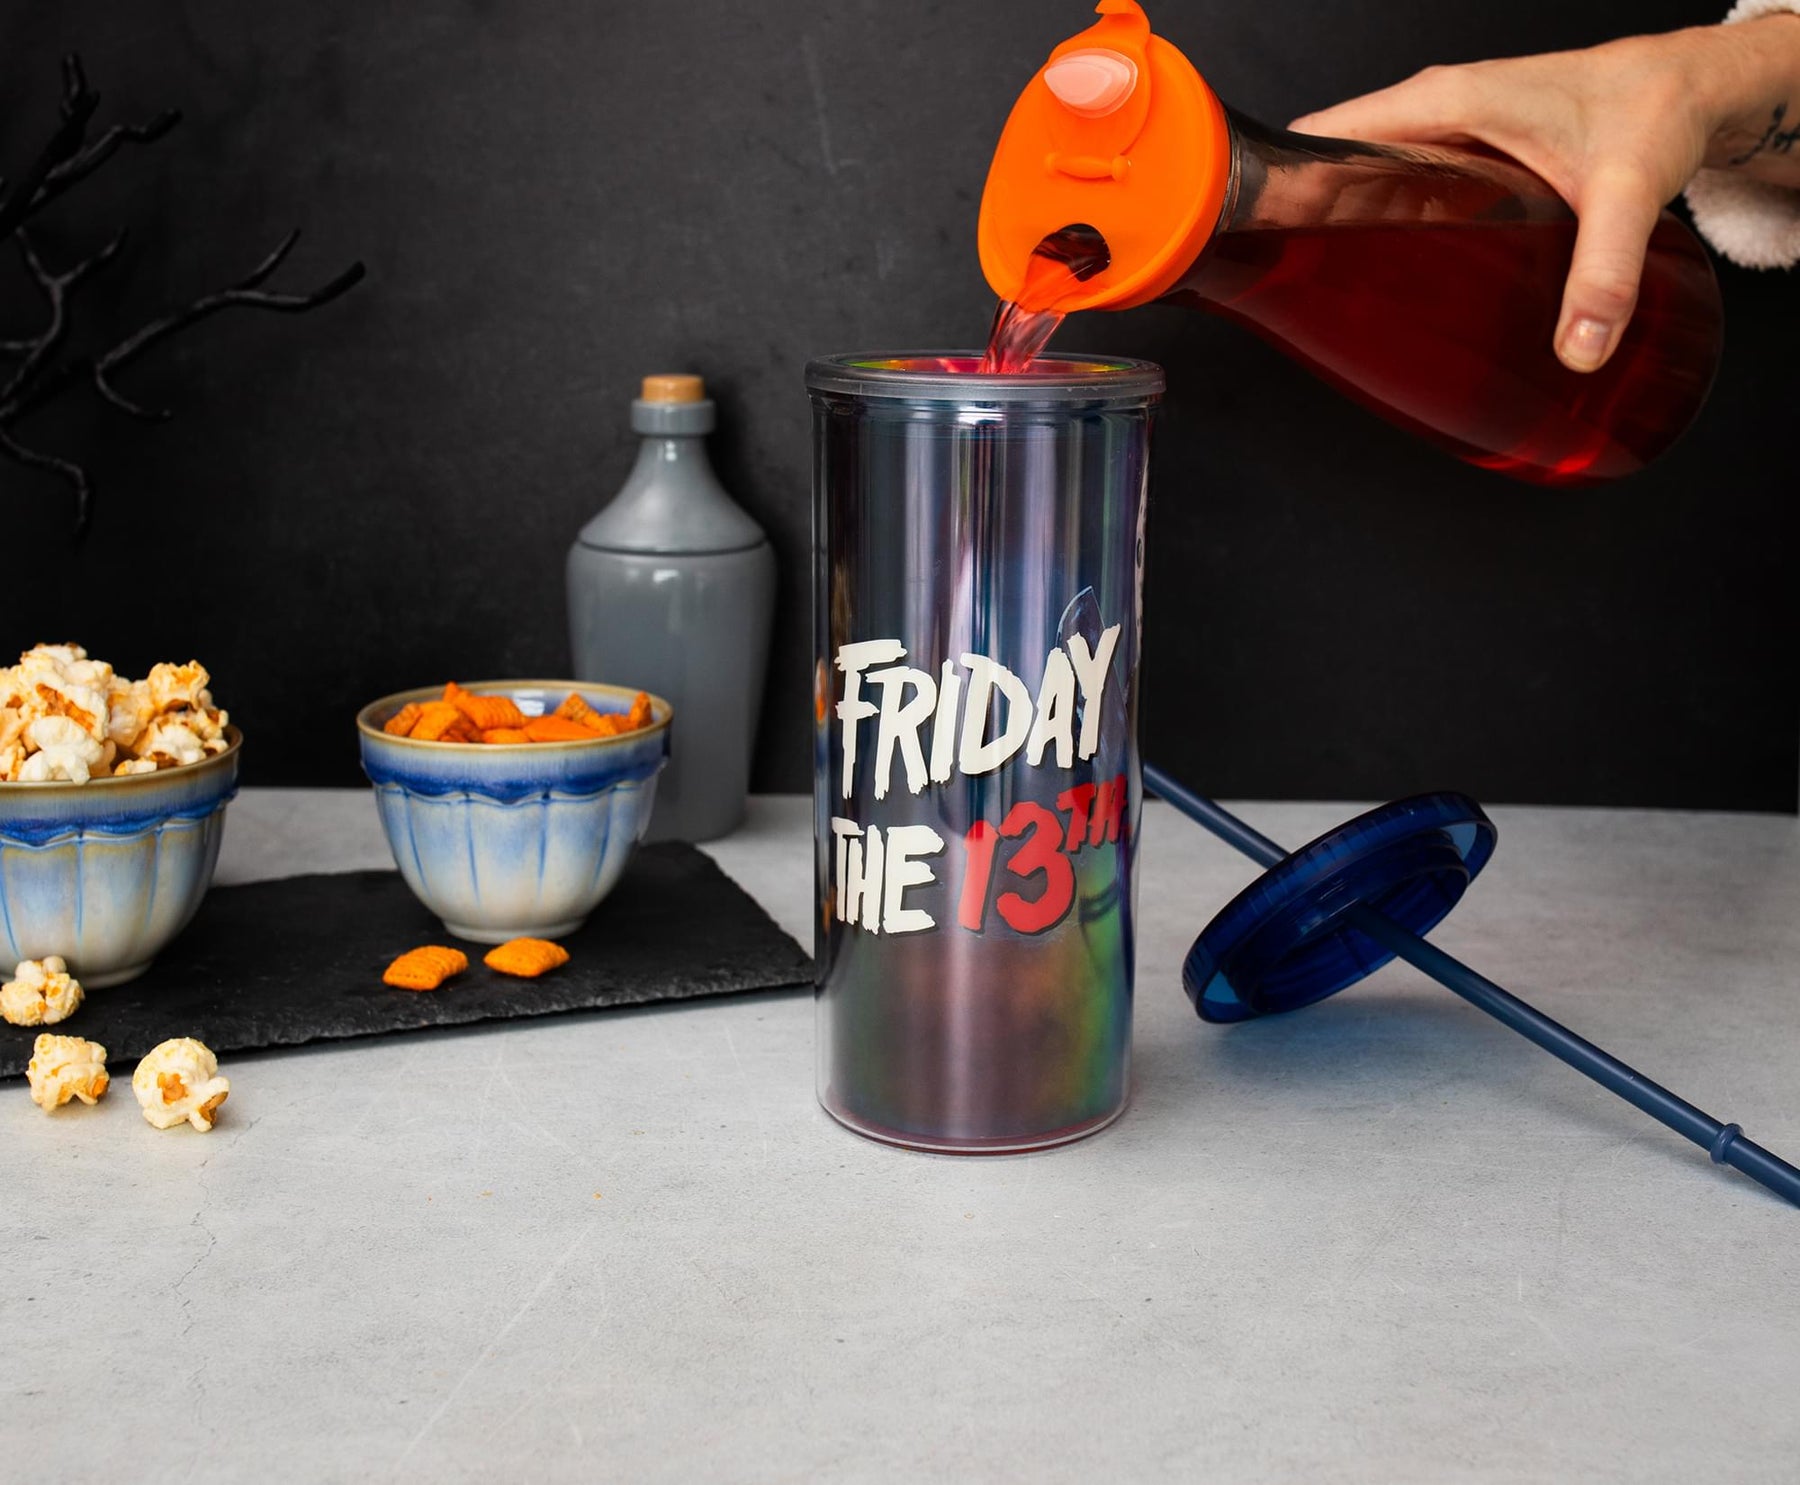 Friday The 13th Jason Carnival Cup With Lid and Straw | Holds 20 Ounces